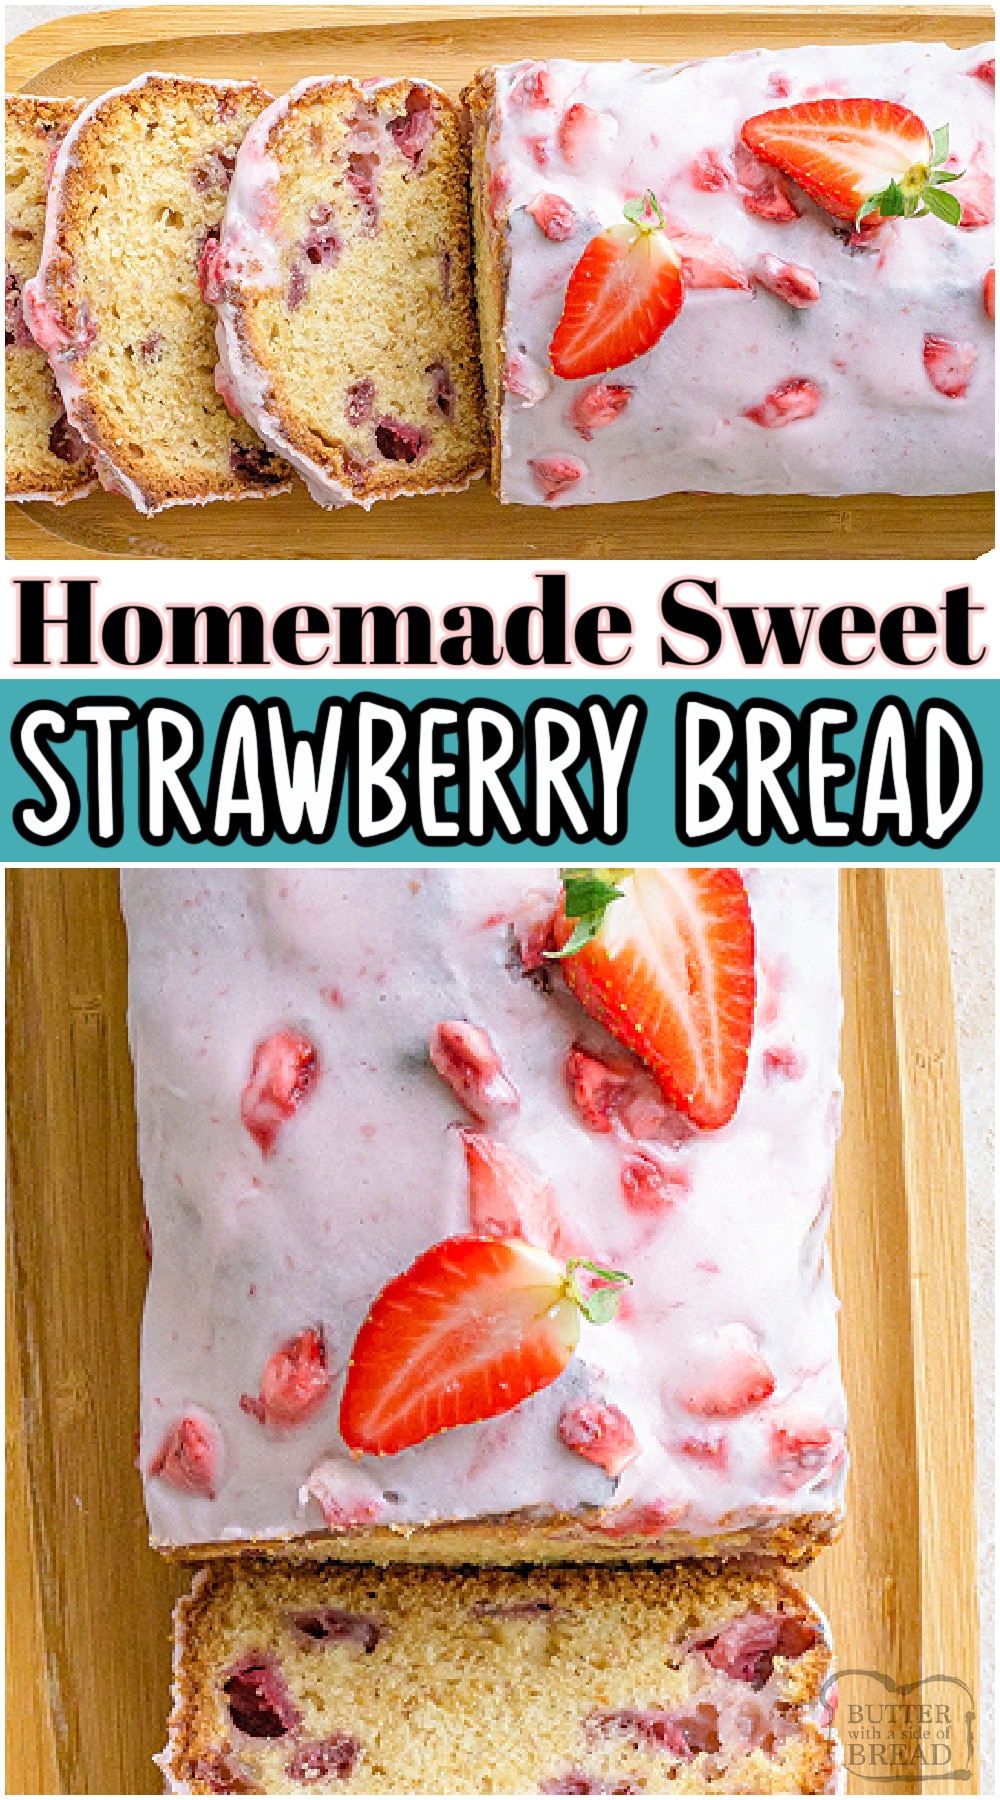 Strawberry Bread with Glaze is a delicious sweet bread recipe made with fresh strawberries. We love the classic ingredients and easy method for making this strawberry quick bread!